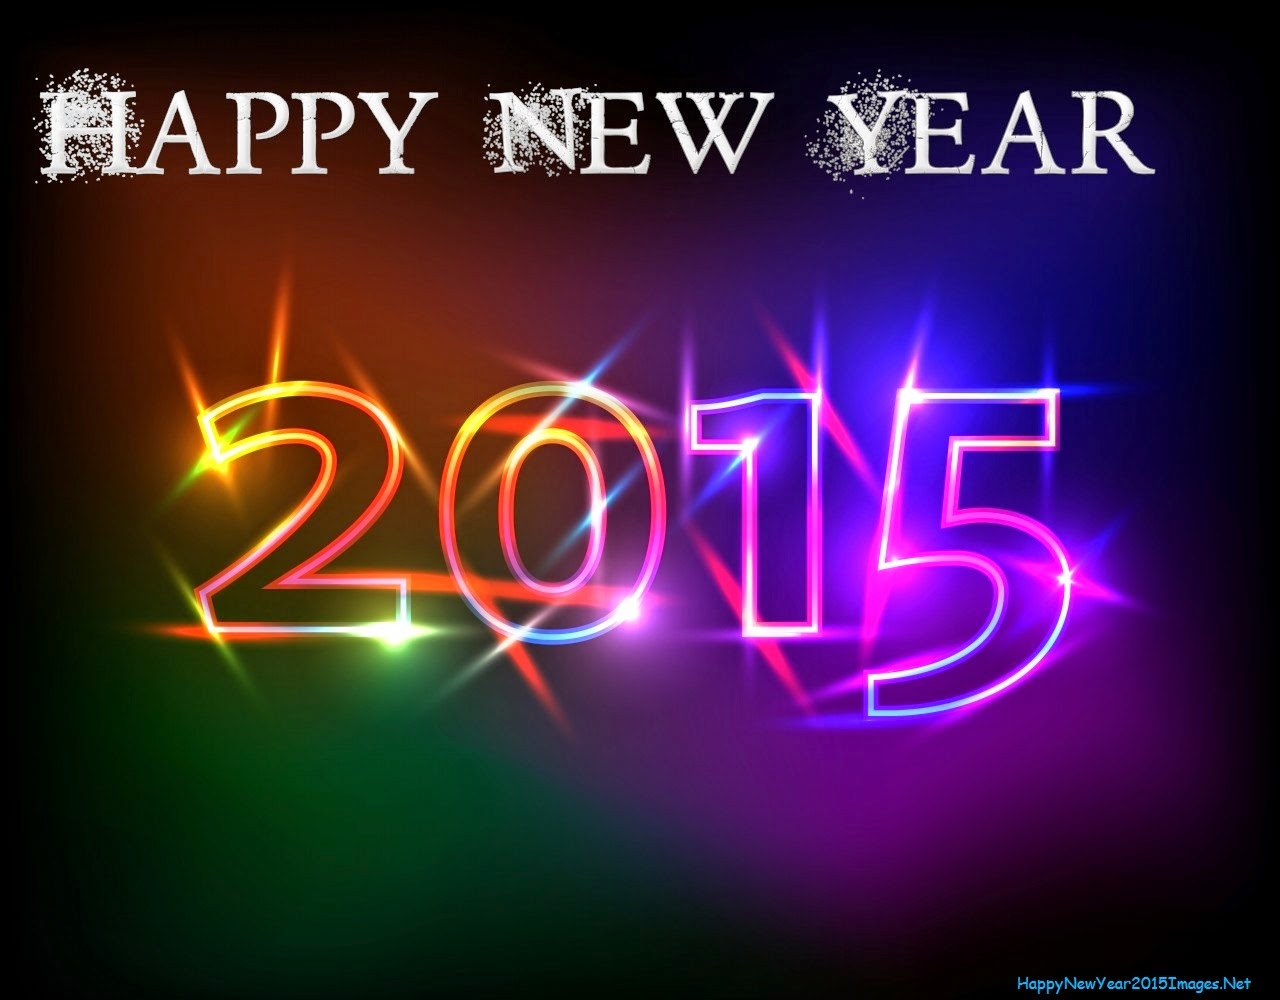 Happy+New+Year+2015+Hot+Colors+On+Black+Backgrounds.jpg